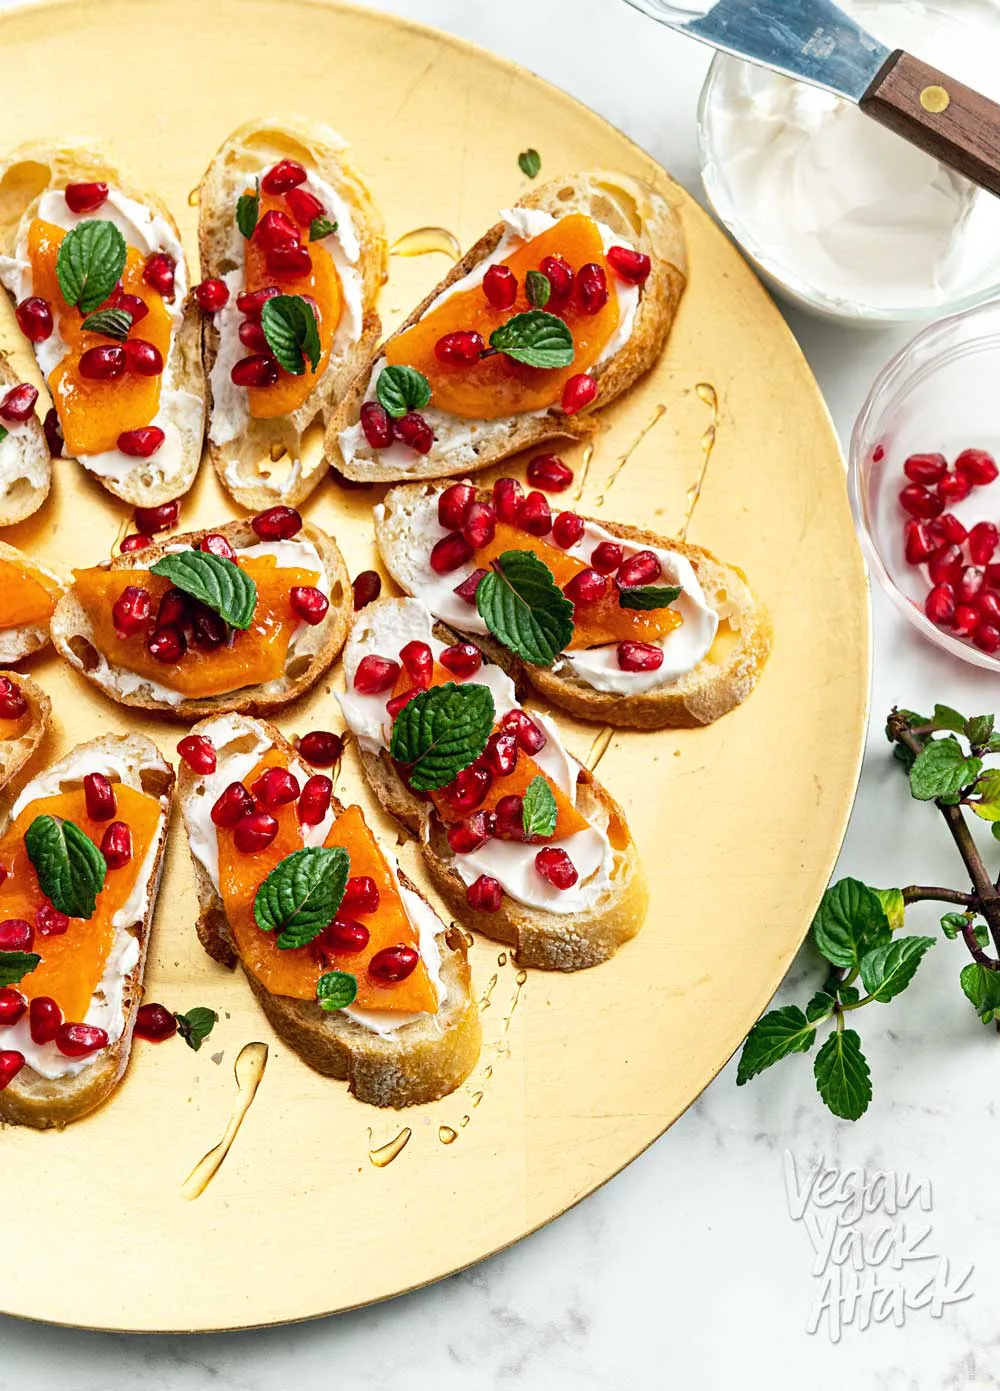 Gold plate topped with pomegranate persimmon crostini